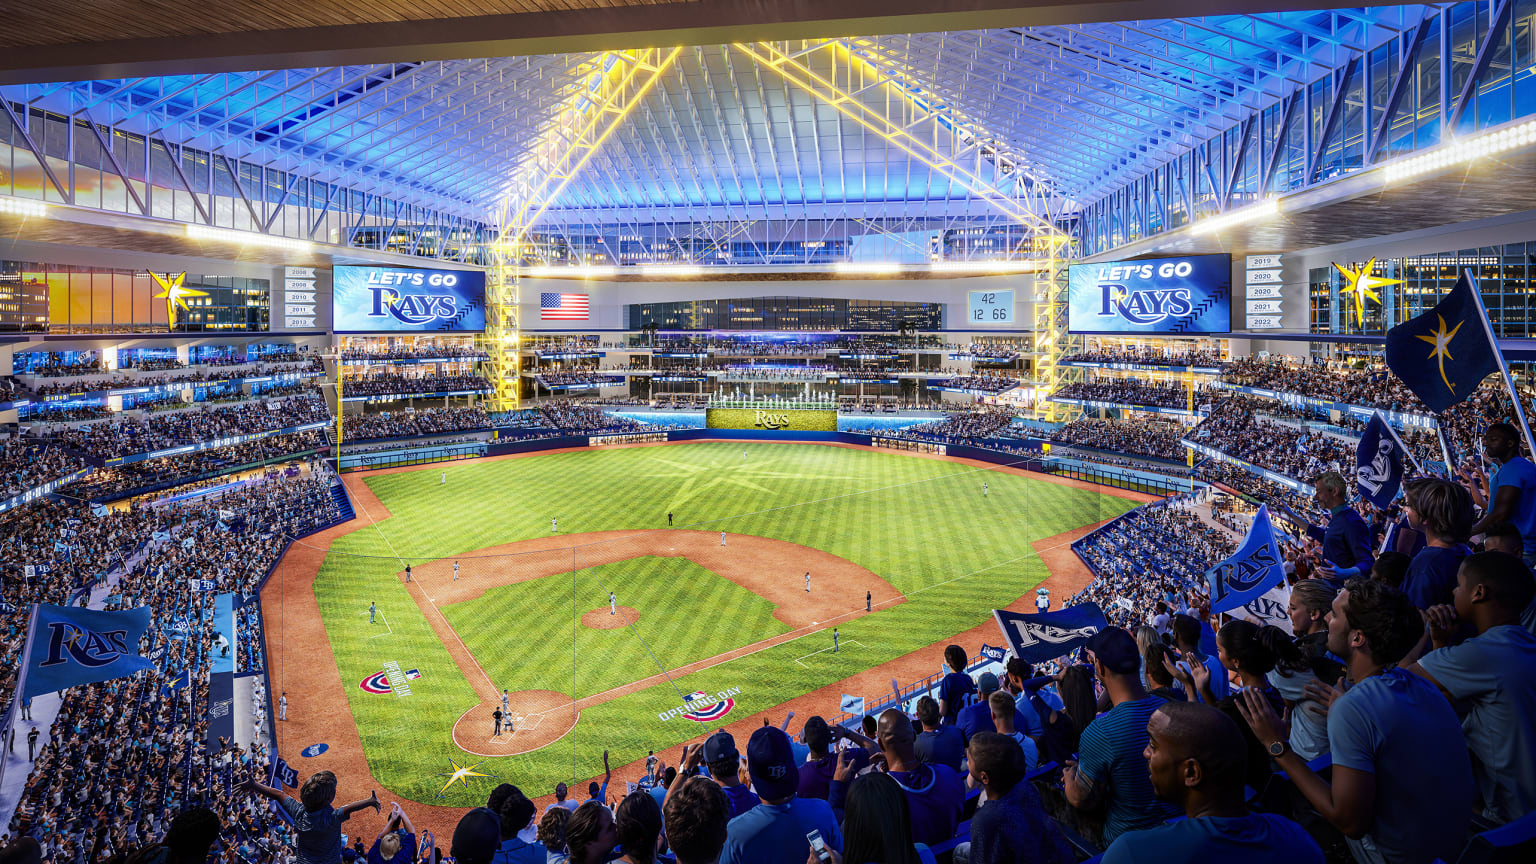 An artist's rendering of a game at the new Rays ballpark